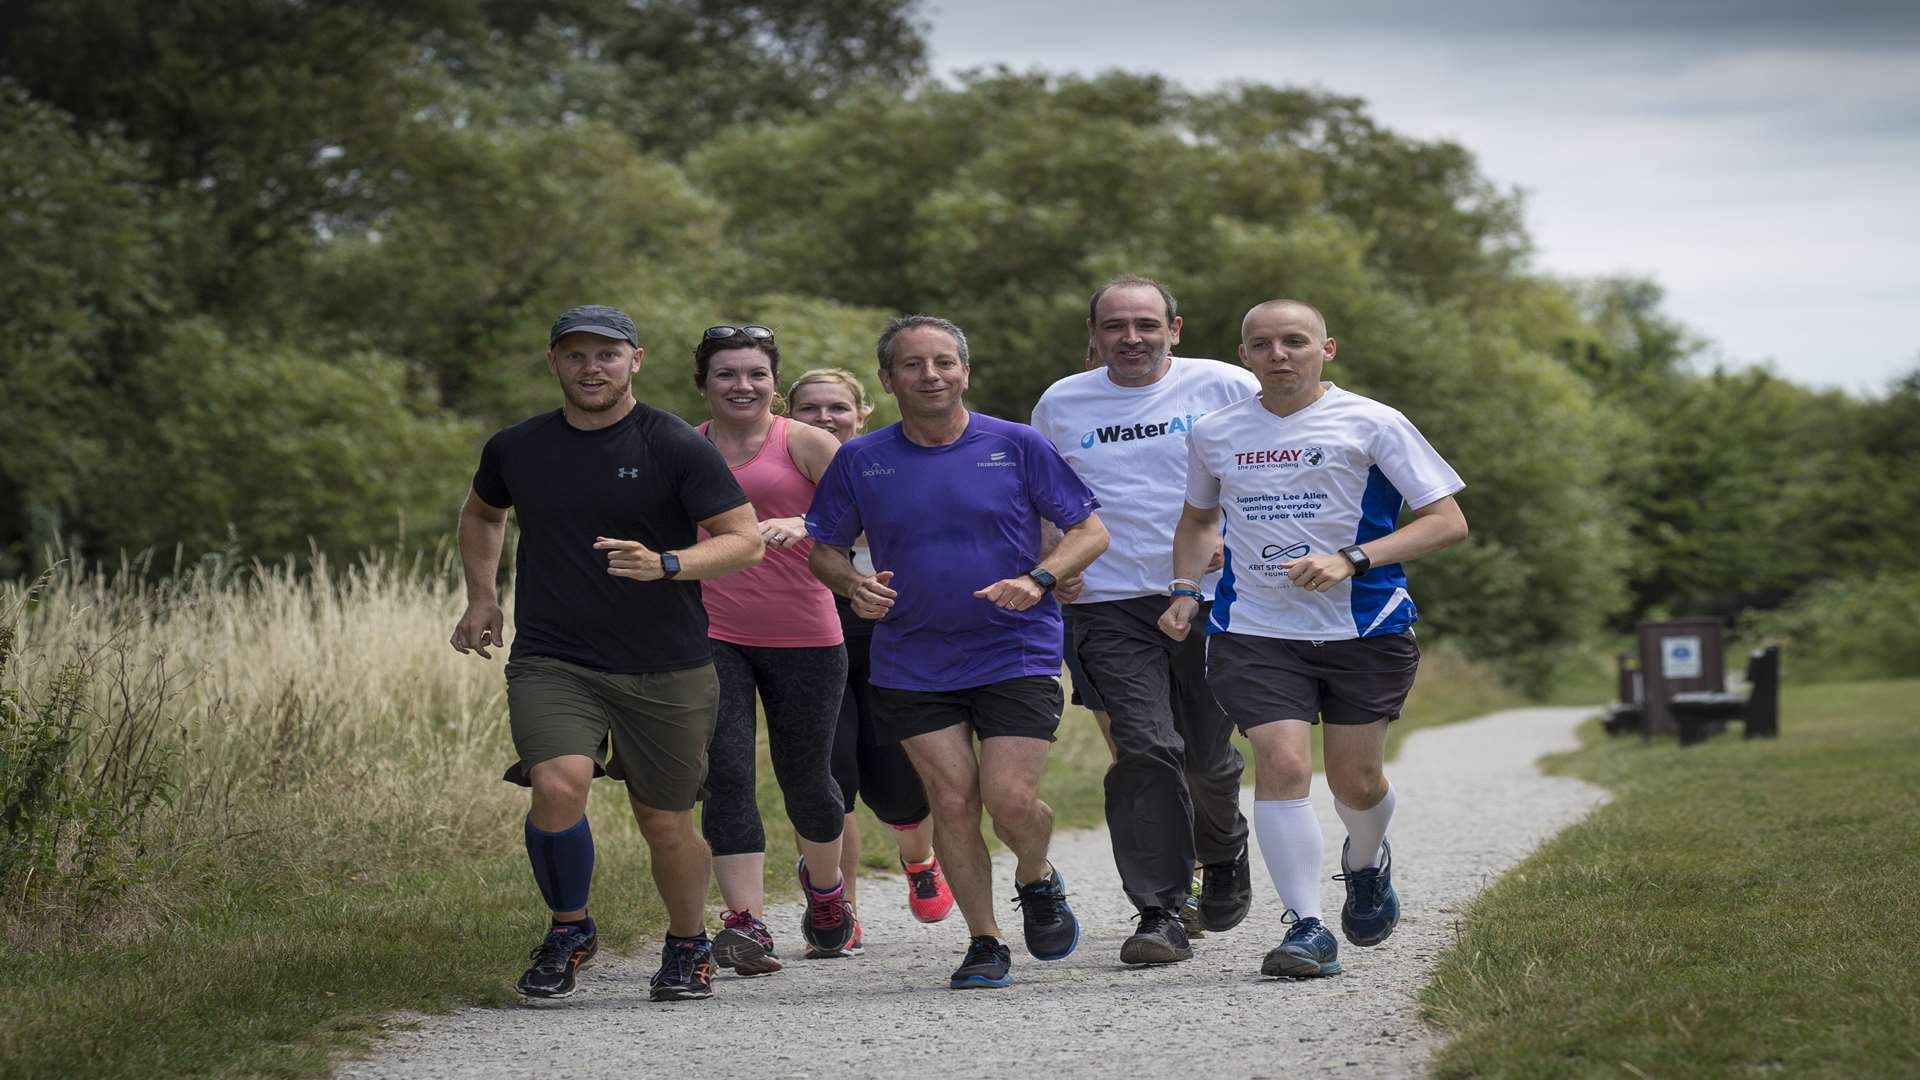 Lee Allen, from Queenborough, has been joined by a range of supporters on his running challenge.